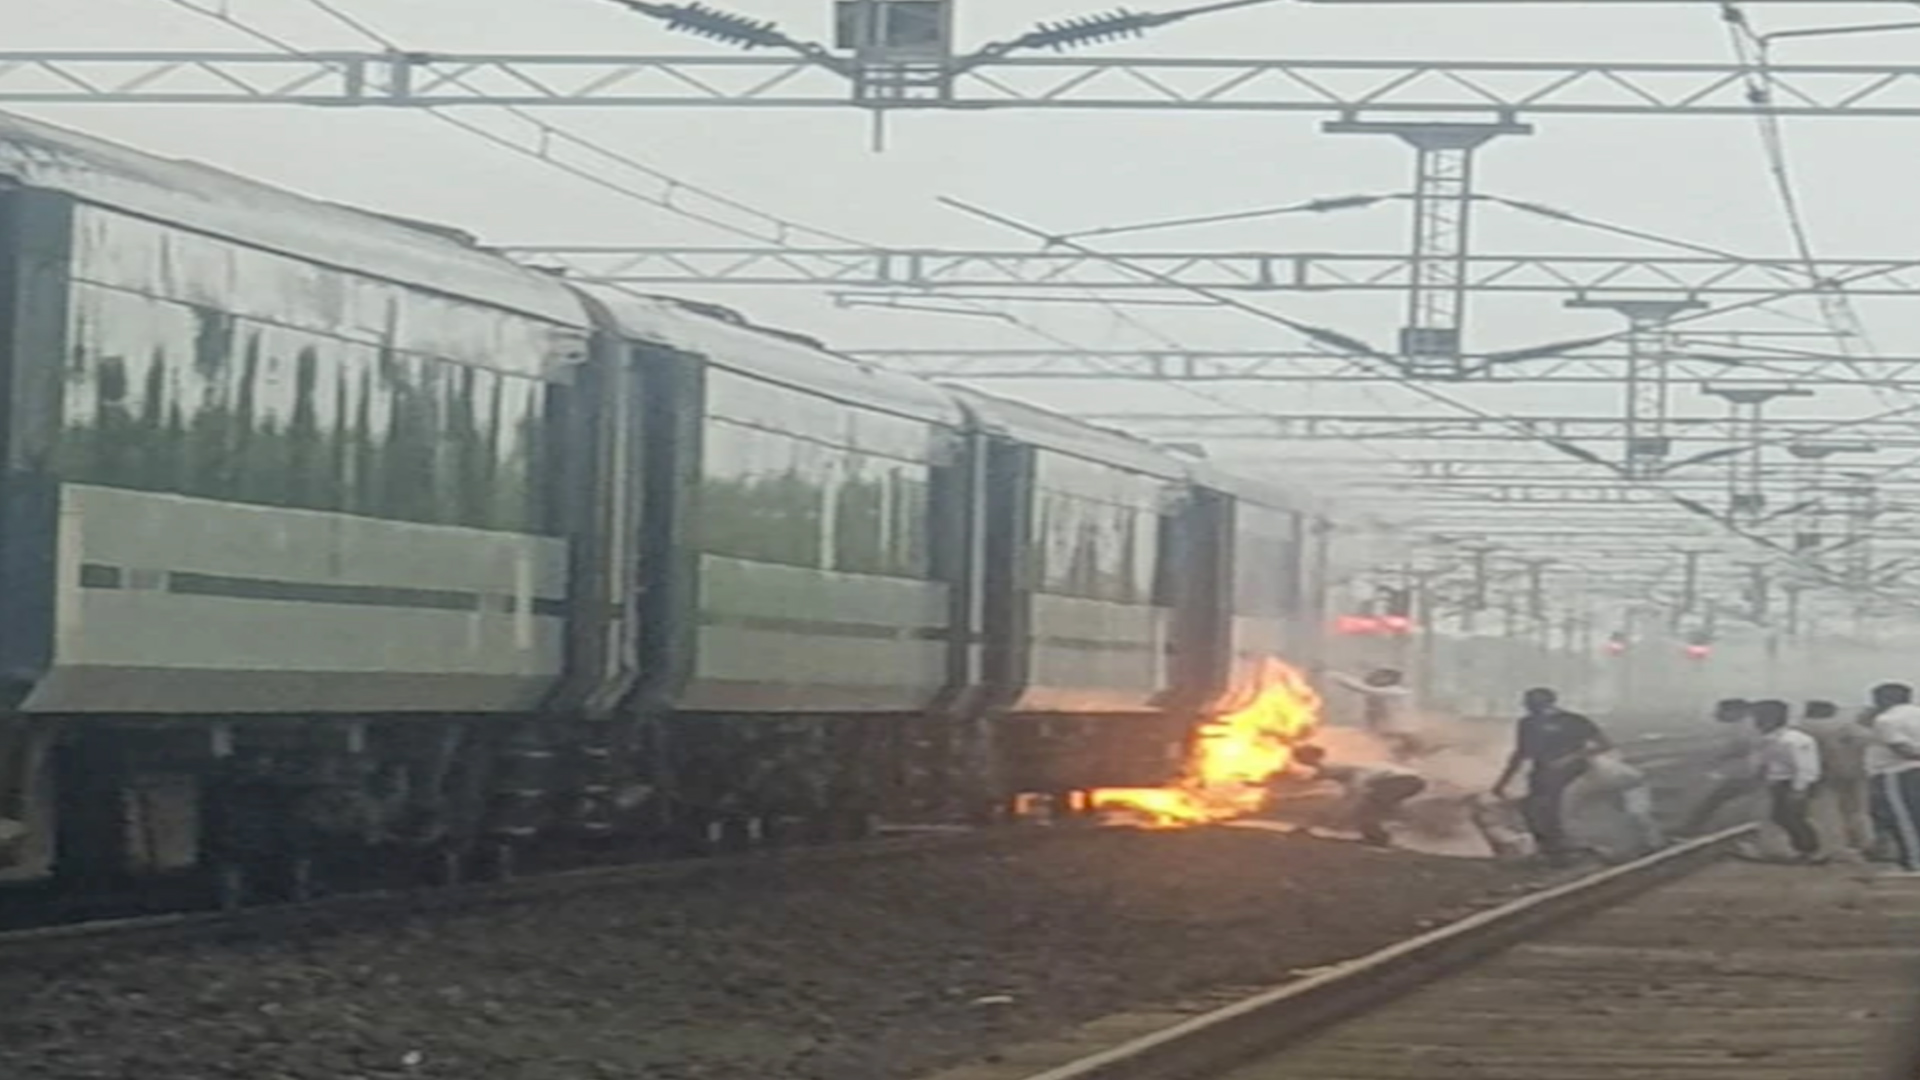 How did the Vande Bharat Express going from Bhopal to Delhi catch fire?